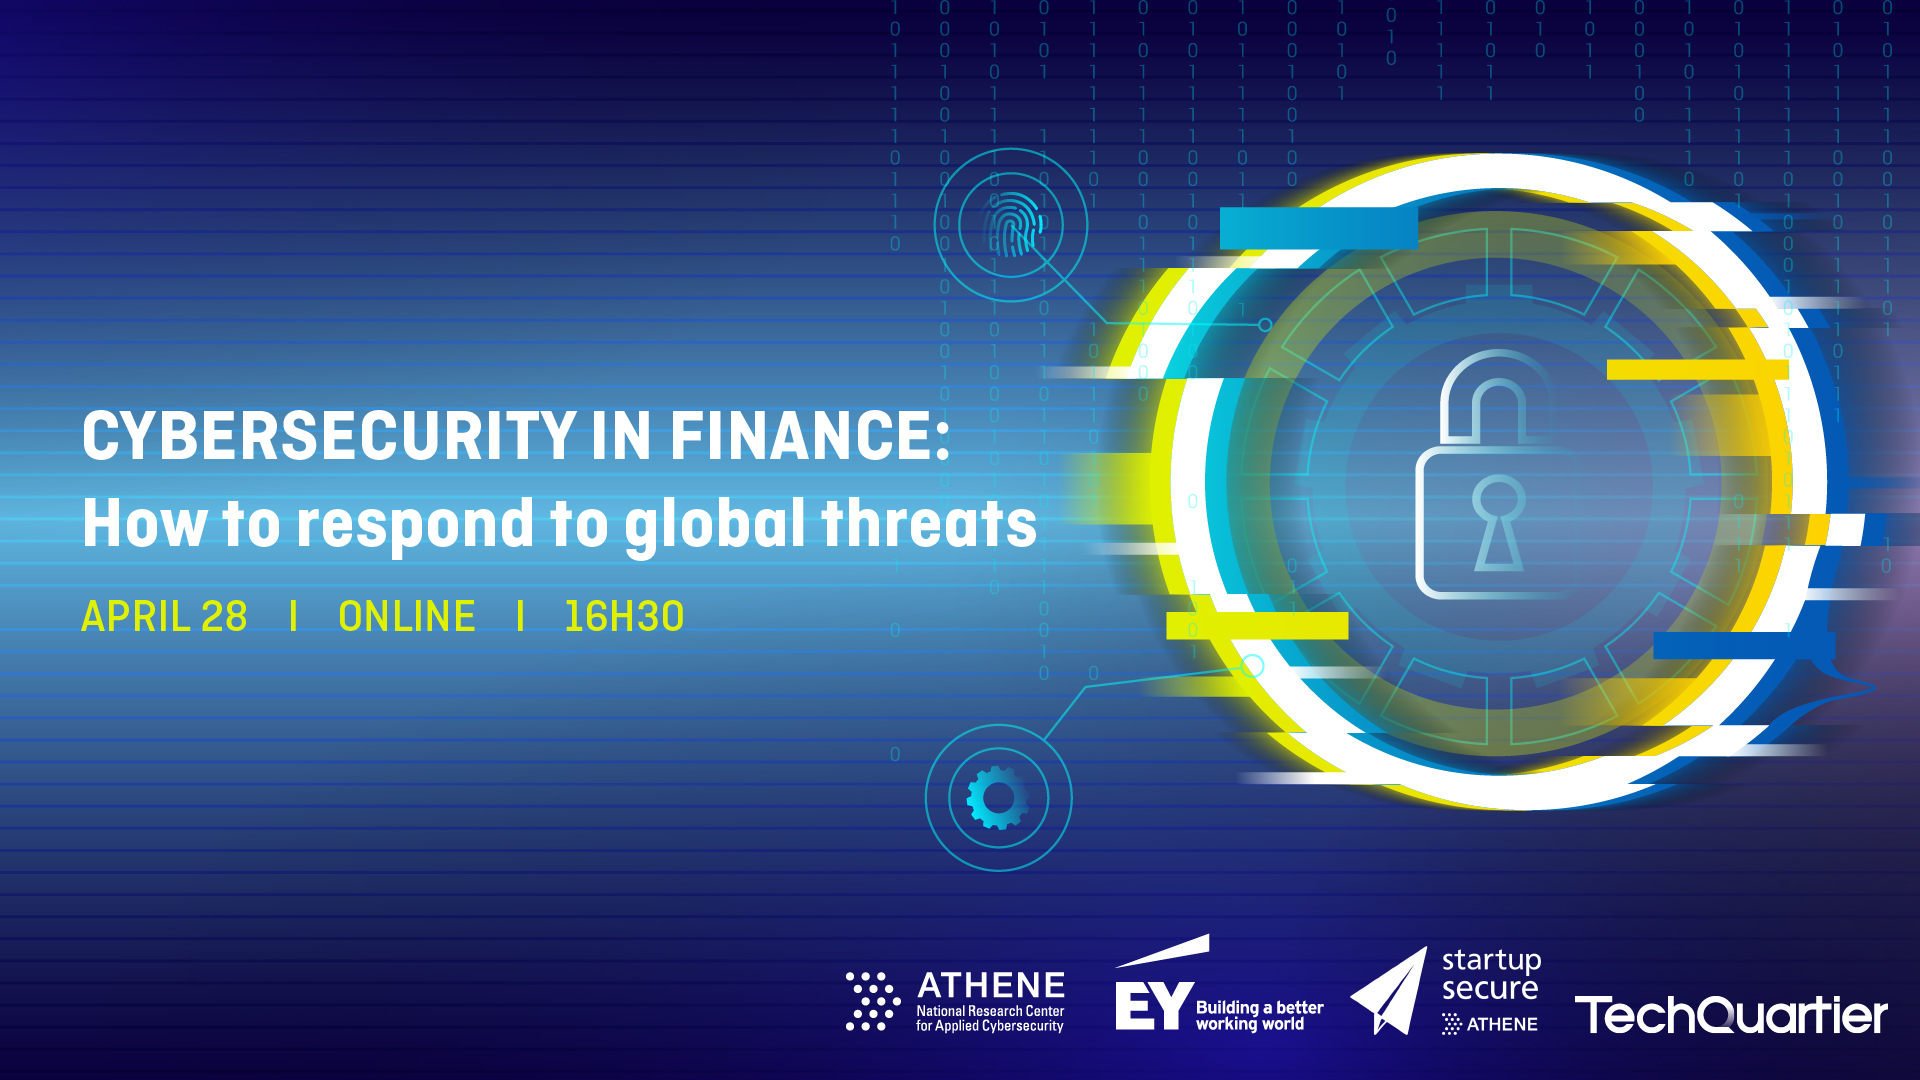 Three trends to improve cybersecurity in finance 